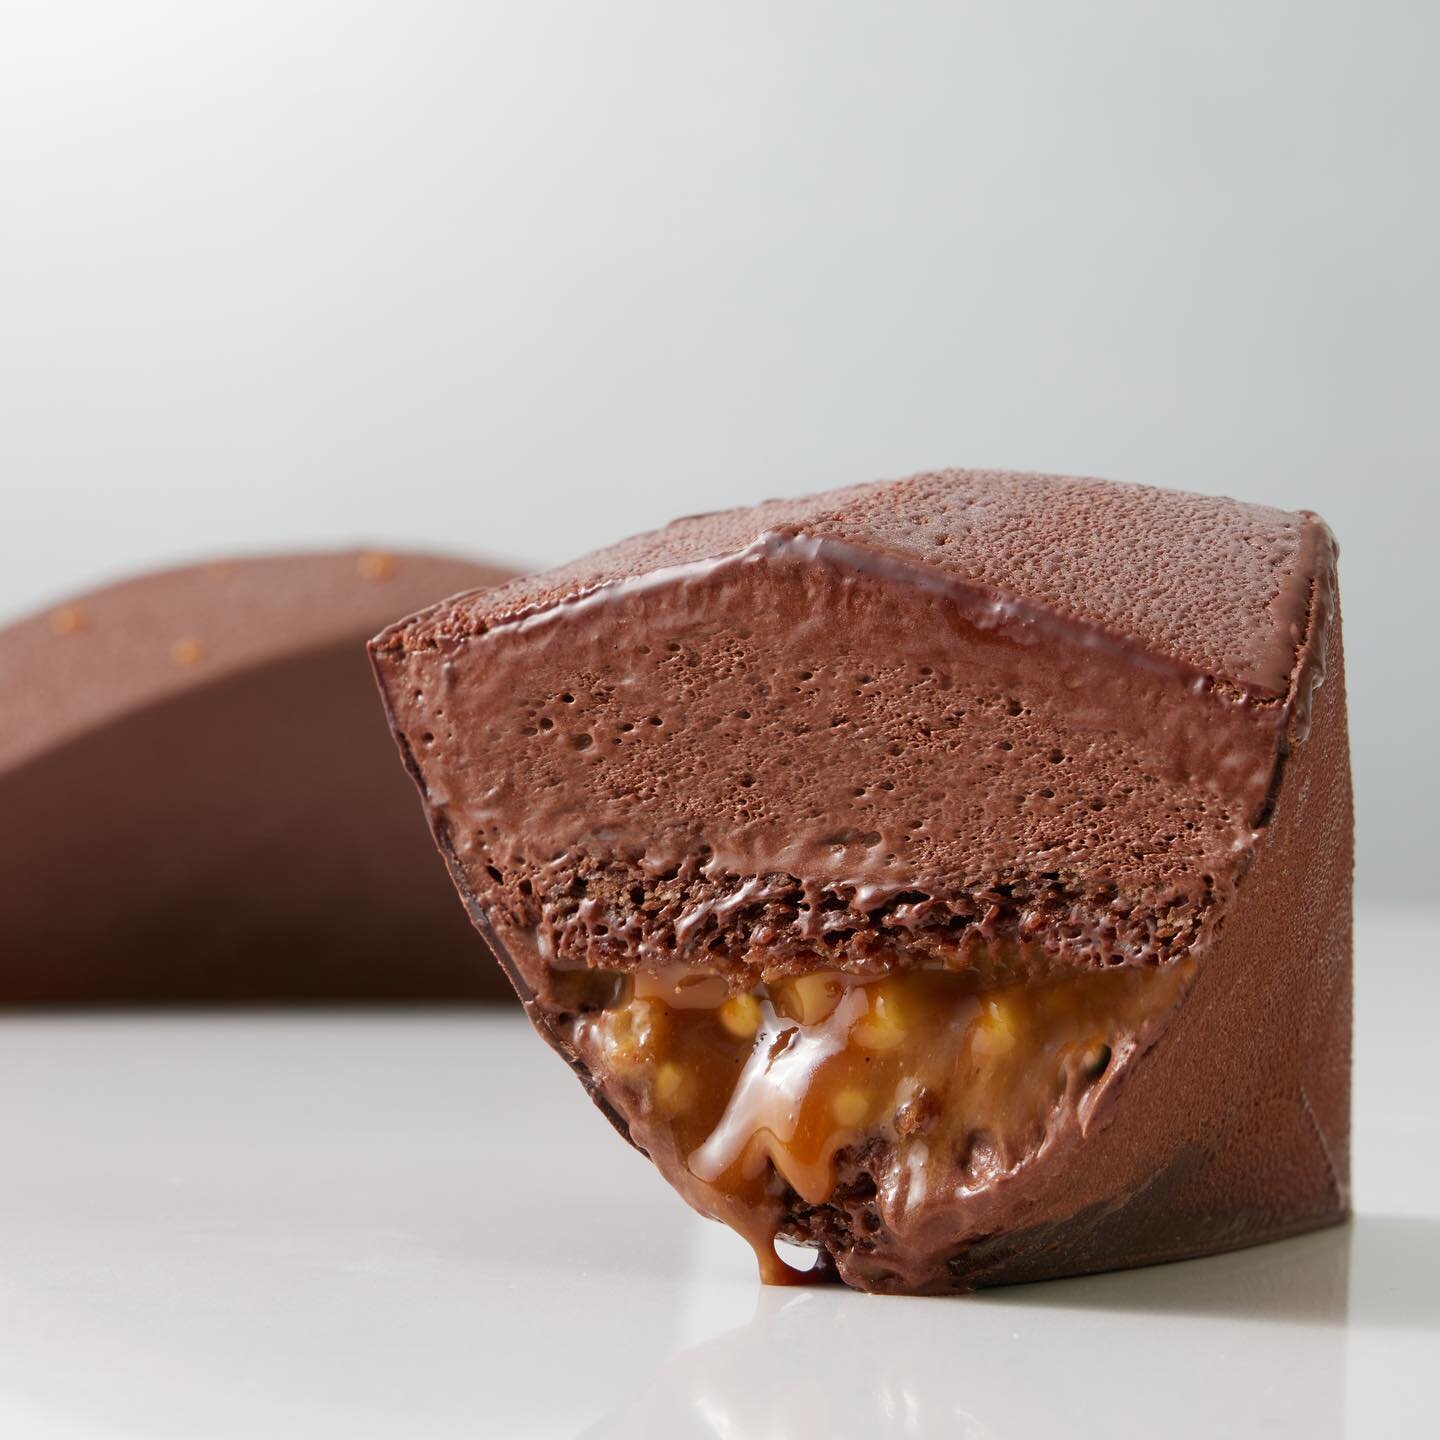 The mold for this entremet is created from recycled paper, with a thin layer of tempered chocolate to create a moisture-proof barrier. My goal is to inspire chefs to think beyond plastic and silicon, and consider the range of sustainable materials th